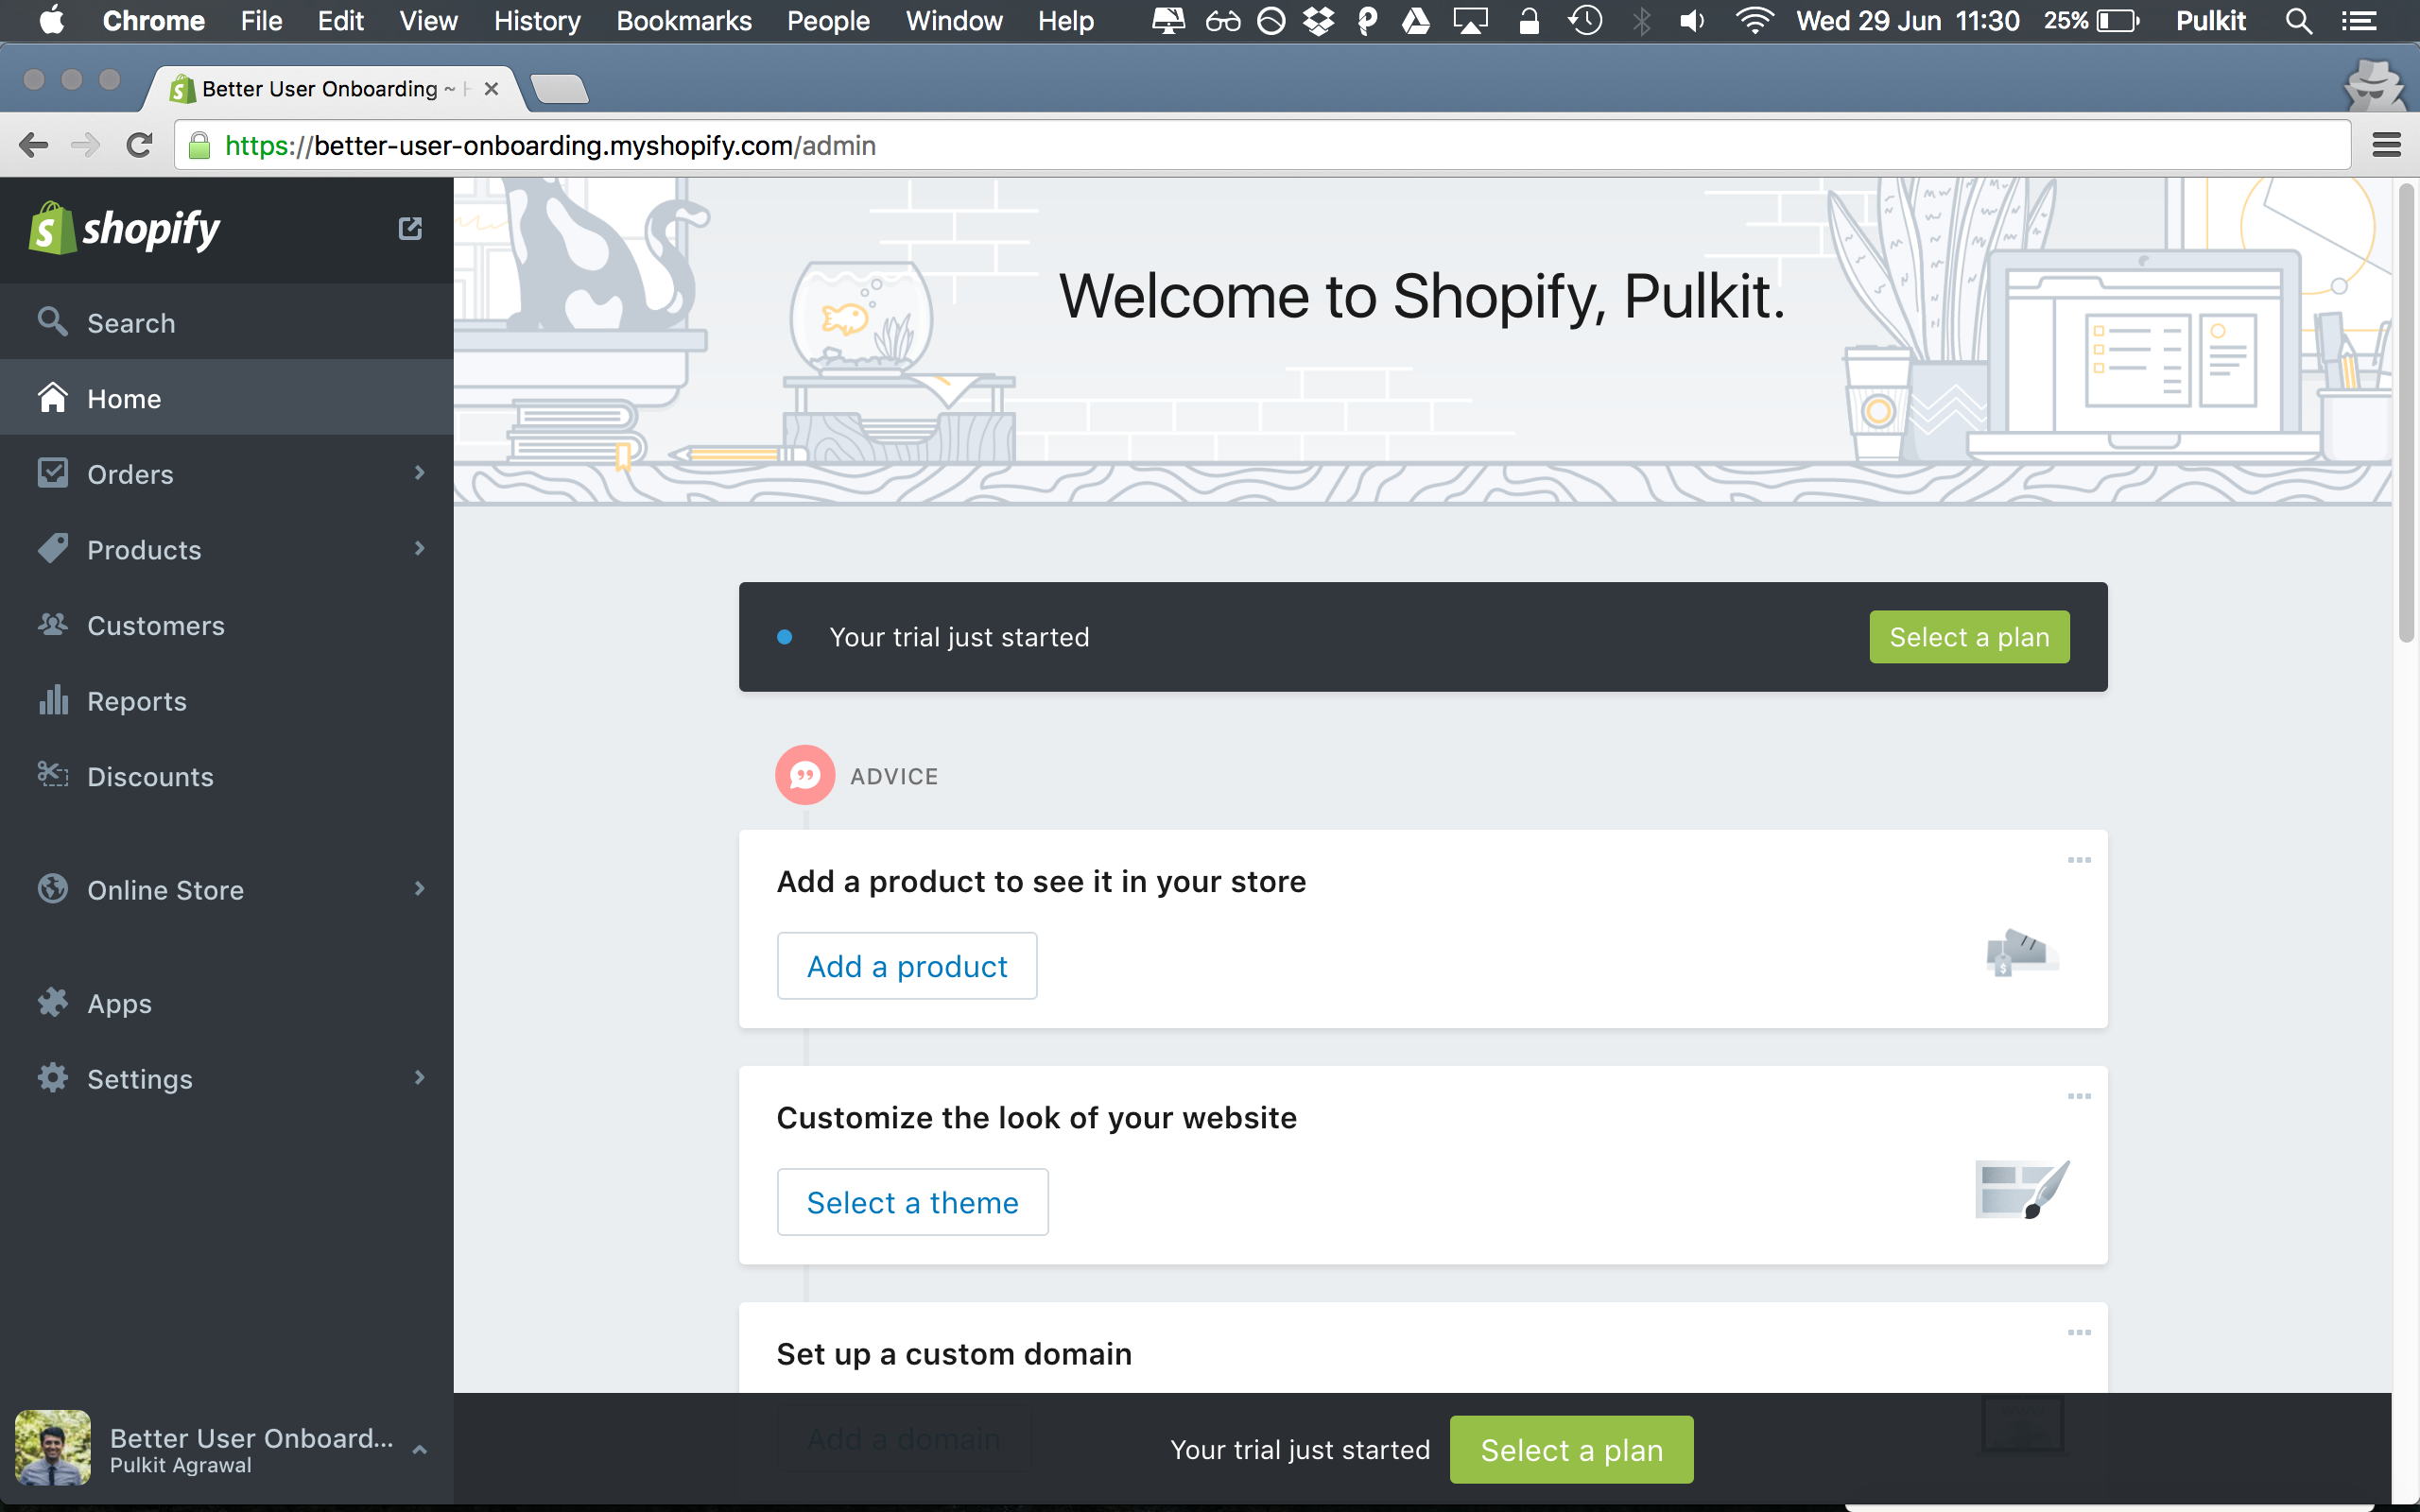 The Shopify welcome screen is focussed on providing you value and learning the product along the way